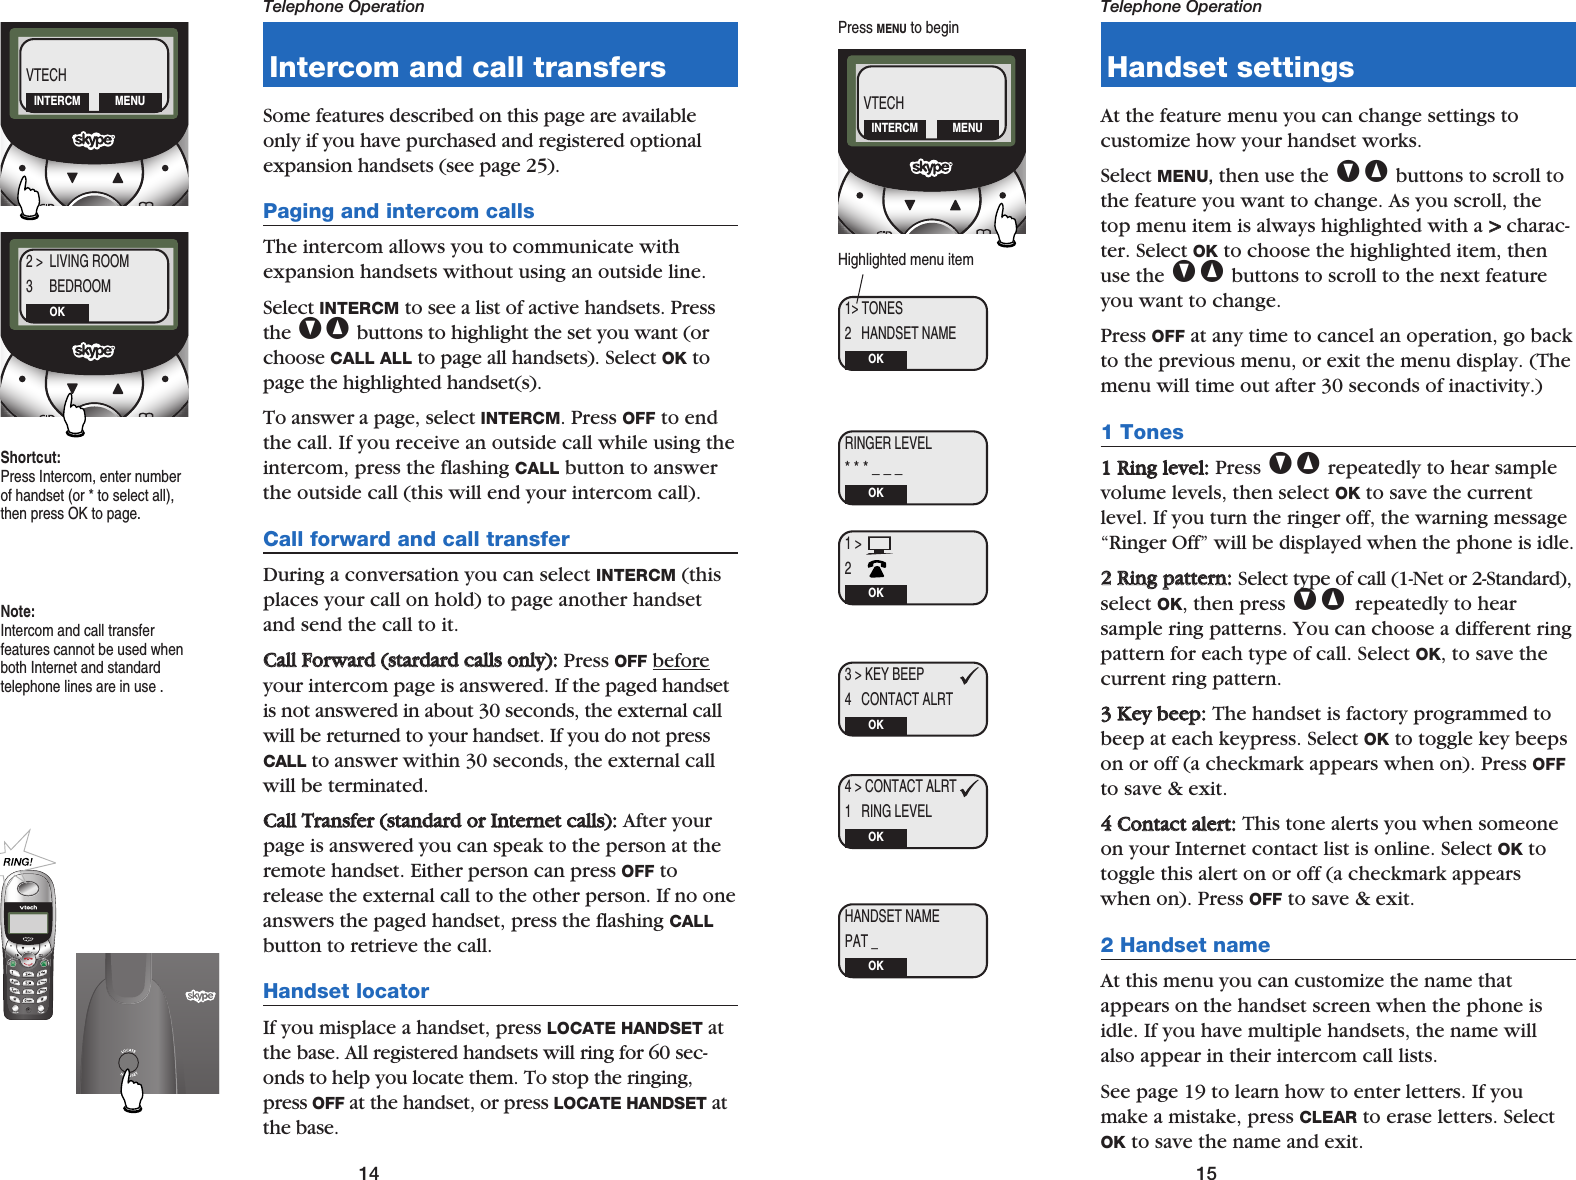 15Telephone Operation14Telephone OperationIntercom and call transfersSome features described on this page are availableonly if you have purchased and registered optionalexpansion handsets (see page 25). Paging and intercom callsThe intercom allows you to communicate withexpansion handsets without using an outside line.Select INTERCM to see a list of active handsets. Pressthe V^ buttons to highlight the set you want (orchoose CALL ALL to page all handsets). Select OK topage the highlighted handset(s). To answer a page, select INTERCM. Press OFF to endthe call. If you receive an outside call while using theintercom, press the flashing CALL button to answerthe outside call (this will end your intercom call).Call forward and call transferDuring a conversation you can select INTERCM (thisplaces your call on hold) to page another handsetand send the call to it.CCaallll  FFoorrwwaarrdd  ((ssttaarrddaarrdd  ccaallllss  oonnllyy))::Press OFF beforeyour intercom page is answered. If the paged handsetis not answered in about 30 seconds, the external callwill be returned to your handset. If you do not pressCALL to answer within 30 seconds, the external callwill be terminated.CCaallll  TTrraannssffeerr  ((ssttaannddaarrdd  oorr  IInntteerrnneett  ccaallllss))::After yourpage is answered you can speak to the person at theremote handset. Either person can press OFF torelease the external call to the other person. If no oneanswers the paged handset, press the flashing CALLbutton to retrieve the call.Handset locatorIf you misplace a handset, press LOCATE HANDSET atthe base. All registered handsets will ring for 60 sec-onds to help you locate them. To stop the ringing,press OFF at the handset, or press LOCATE HANDSET atthe base.Handset settingsAt the feature menu you can change settings to customize how your handset works. Select MENU,then use the V^ buttons to scroll tothe feature you want to change. As you scroll, thetop menu item is always highlighted with a &gt;&gt;charac-ter. Select OK to choose the highlighted item, thenuse the V^ buttons to scroll to the next featureyou want to change.Press OFF at any time to cancel an operation, go backto the previous menu, or exit the menu display. (Themenu will time out after 30 seconds of inactivity.)1 Tones11  RRiinngg  lleevveell::Press V^ repeatedly to hear samplevolume levels, then select OK to save the currentlevel. If you turn the ringer off, the warning message“Ringer Off” will be displayed when the phone is idle.22  RRiinngg  ppaatttteerrnn::Select type of call (1-Net or 2-Standard),select OK, then press V^ repeatedly to hear sample ring patterns. You can choose a different ringpattern for each type of call. Select OK, to save thecurrent ring pattern.33  KKeeyy  bbeeeepp::The handset is factory programmed tobeep at each keypress. Select OK to toggle key beepson or off (a checkmark appears when on). Press OFFto save &amp; exit.44  CCoonnttaacctt  aalleerrtt::This tone alerts you when someoneon your Internet contact list is online. Select OK totoggle this alert on or off (a checkmark appearswhen on). Press OFF to save &amp; exit.2 Handset nameAt this menu you can customize the name thatappears on the handset screen when the phone isidle. If you have multiple handsets, the name willalso appear in their intercom call lists. See page 19 to learn how to enter letters. If youmake a mistake, press CLEAR to erase letters. SelectOK to save the name and exit.2 &gt;  LIVING ROOM3     BEDROOMOKShortcut:Press Intercom, enter numberof handset (or * to select all),then press OK to page.VTECHINTERCM MENURINGER LEVEL* * * _ _ _OK1 &gt; 2    OK3 &gt; KEY BEEP4   CONTACT ALRTOK4 &gt; CONTACT ALRT1   RING LEVELOKHANDSET NAMEPAT _OK1&gt; TONES2   HANDSET NAMEOKHighlighted menu itemPress MENU to beginVTECHINTERCM MENUNote:Intercom and call transfer features cannot be used whenboth Internet and standard telephone lines are in use .